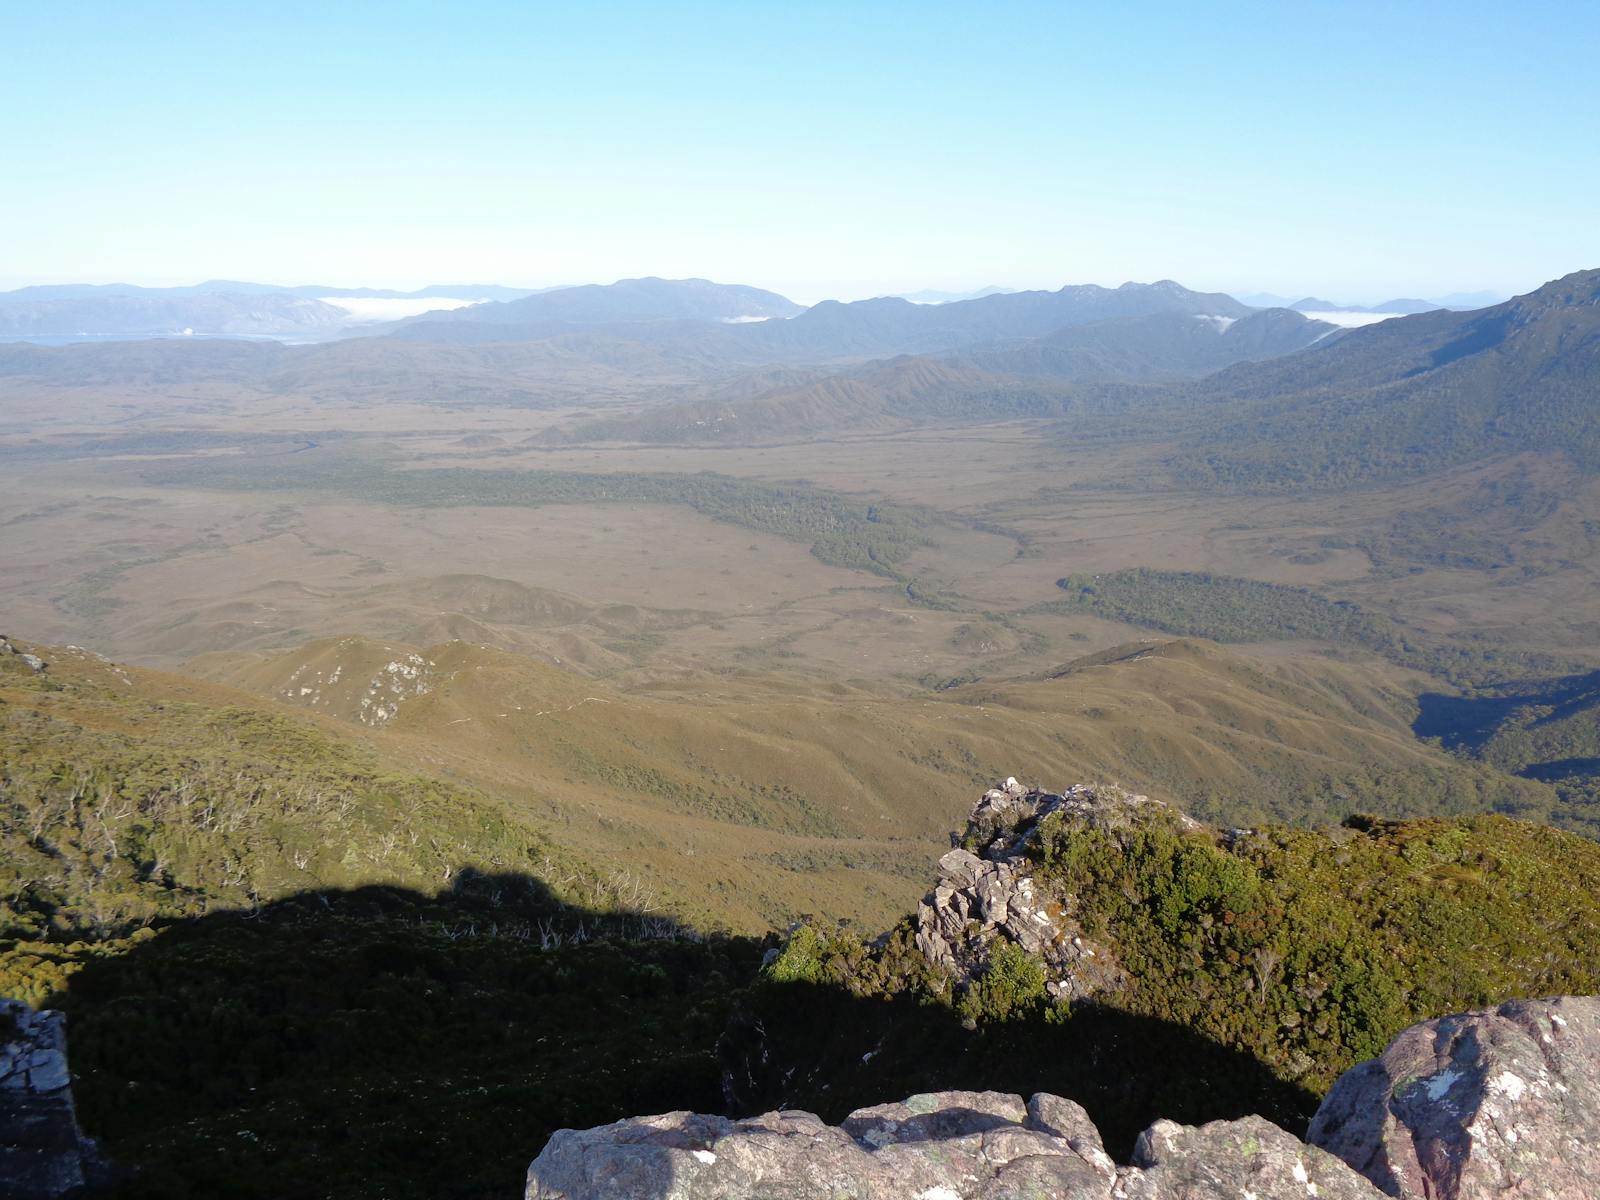 View from the summit of The Ironbound Range